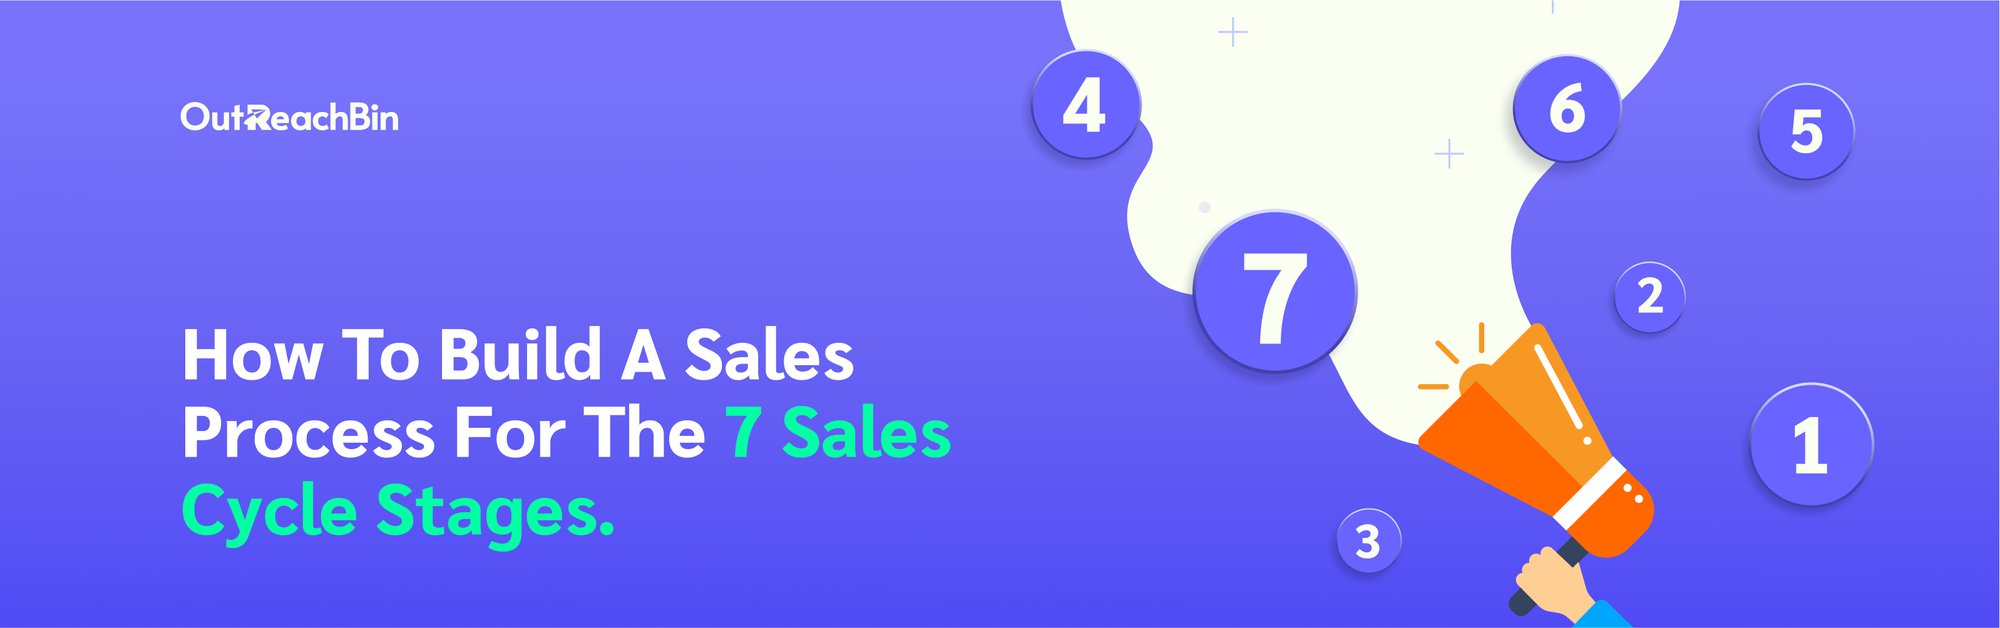 How To Build A Sales Process For The 7 Sales Cycle Stages